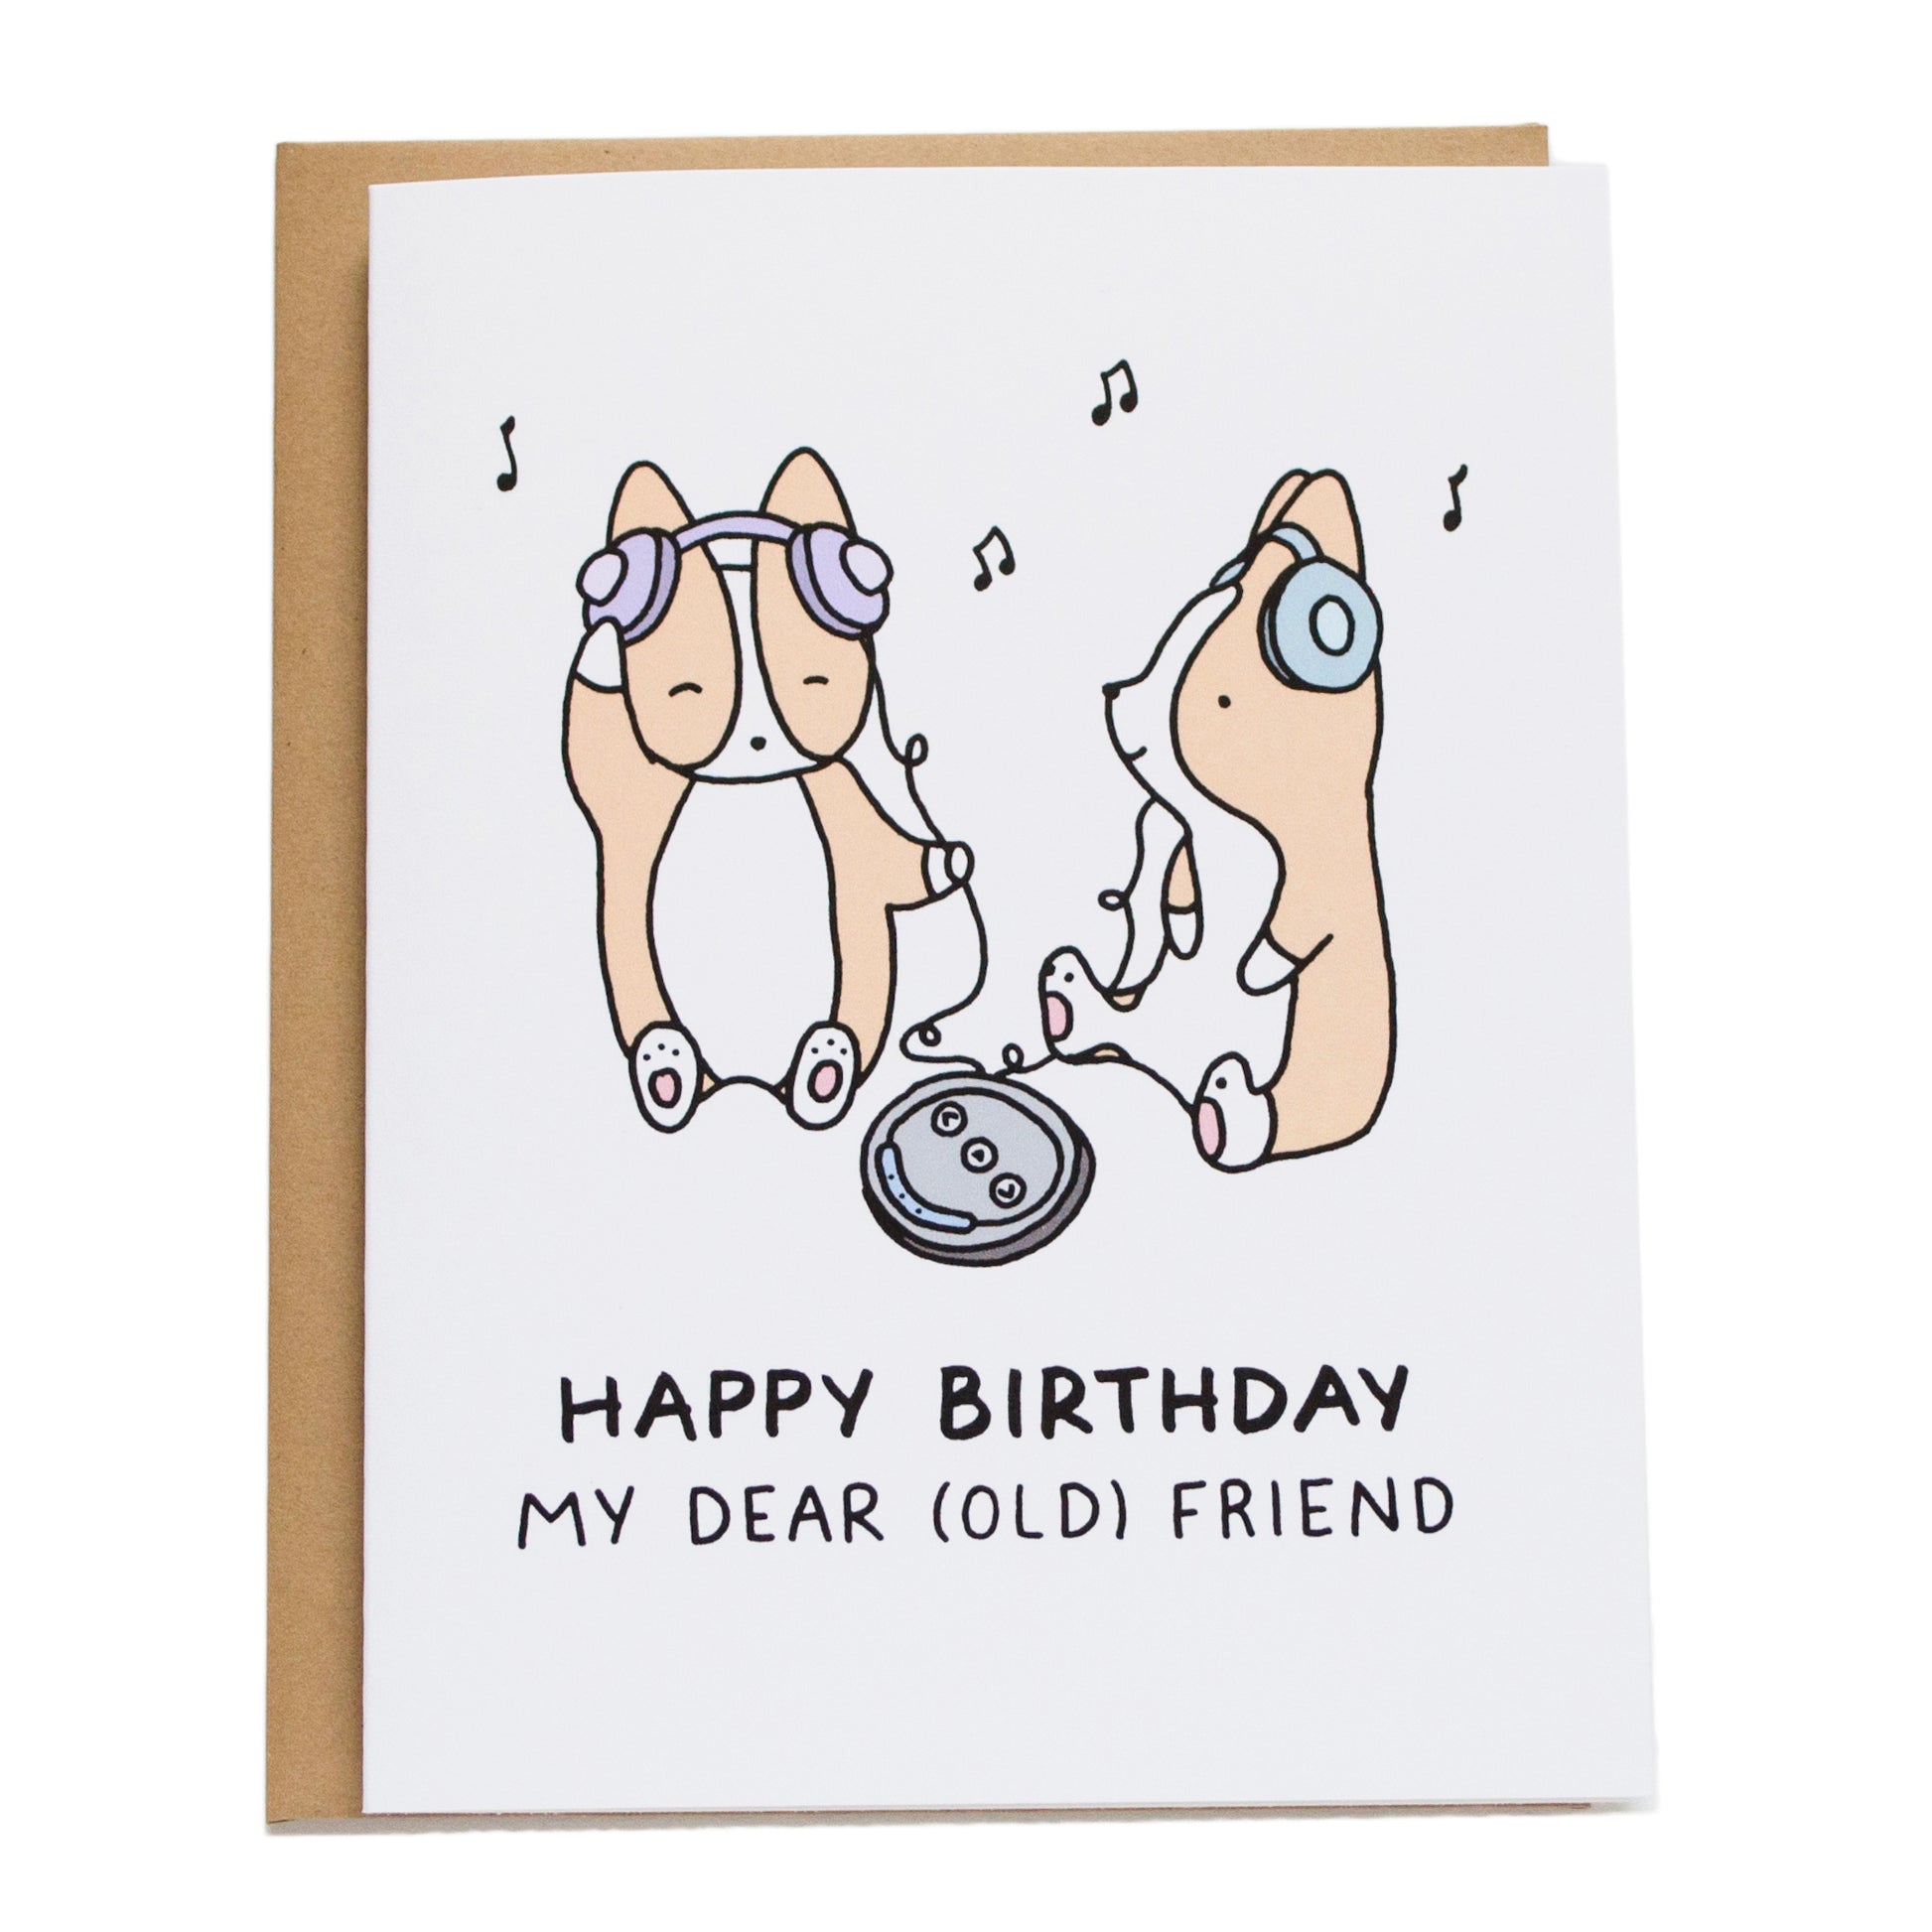 two corgis with headphones on listening to one cd player and card reads happy birthday my dear old friend